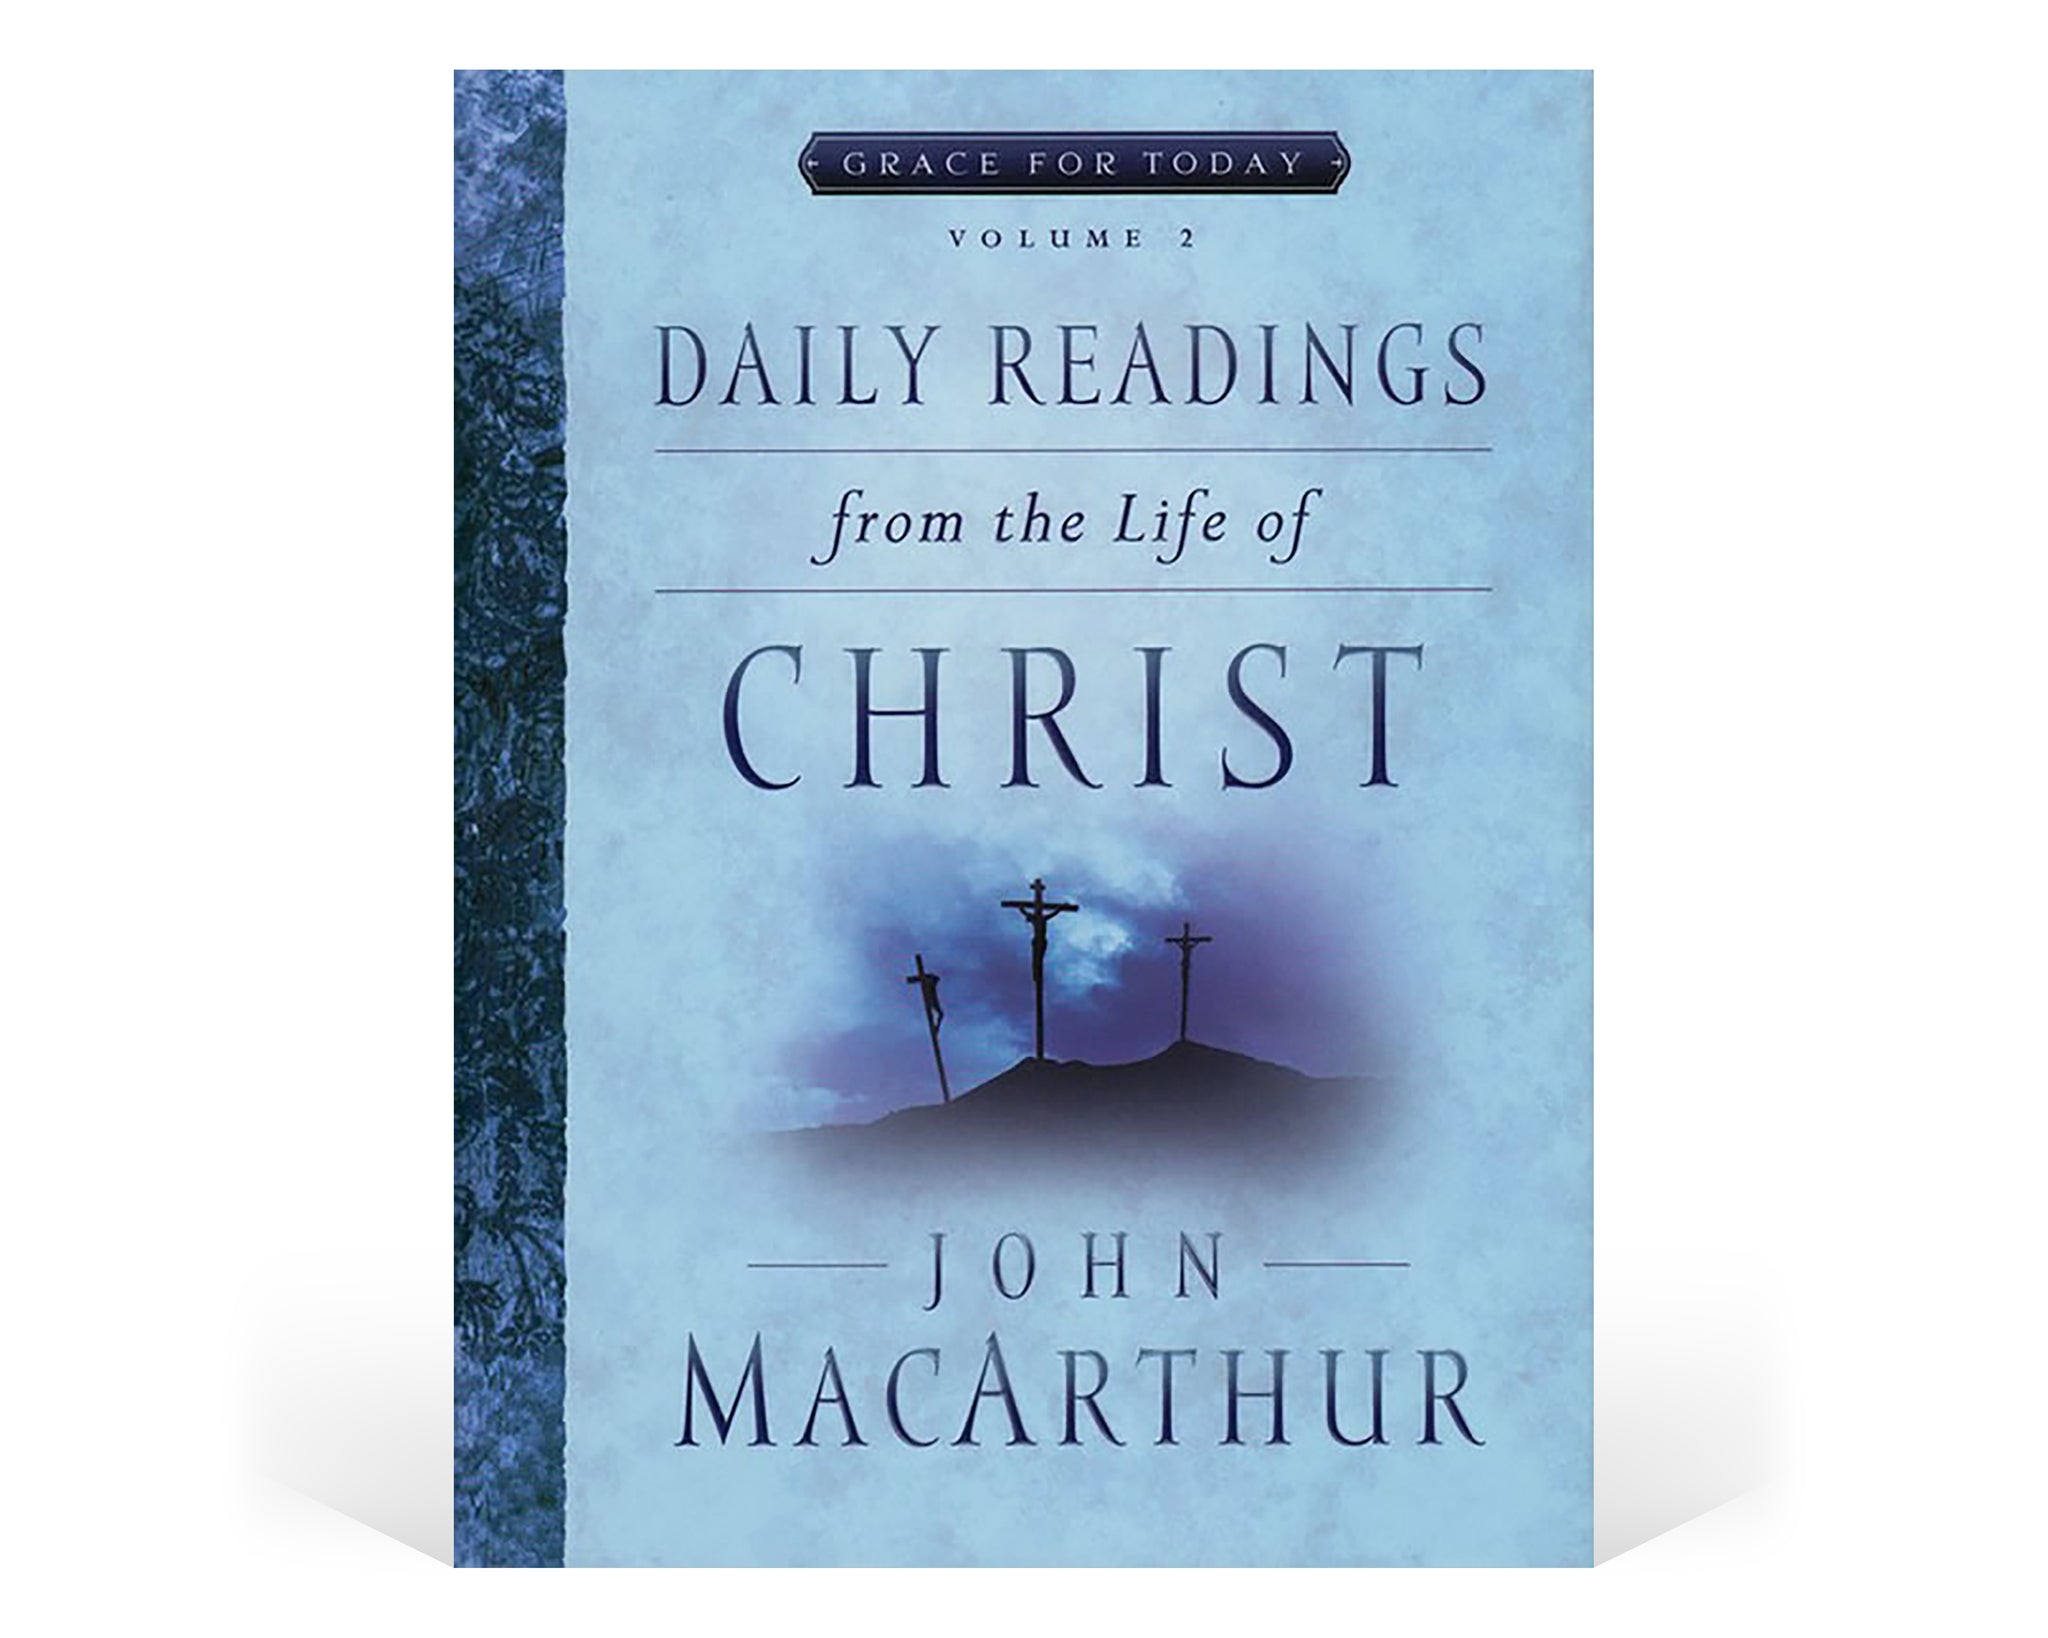 Daily Readings from the Life of Christ, Vol. 2